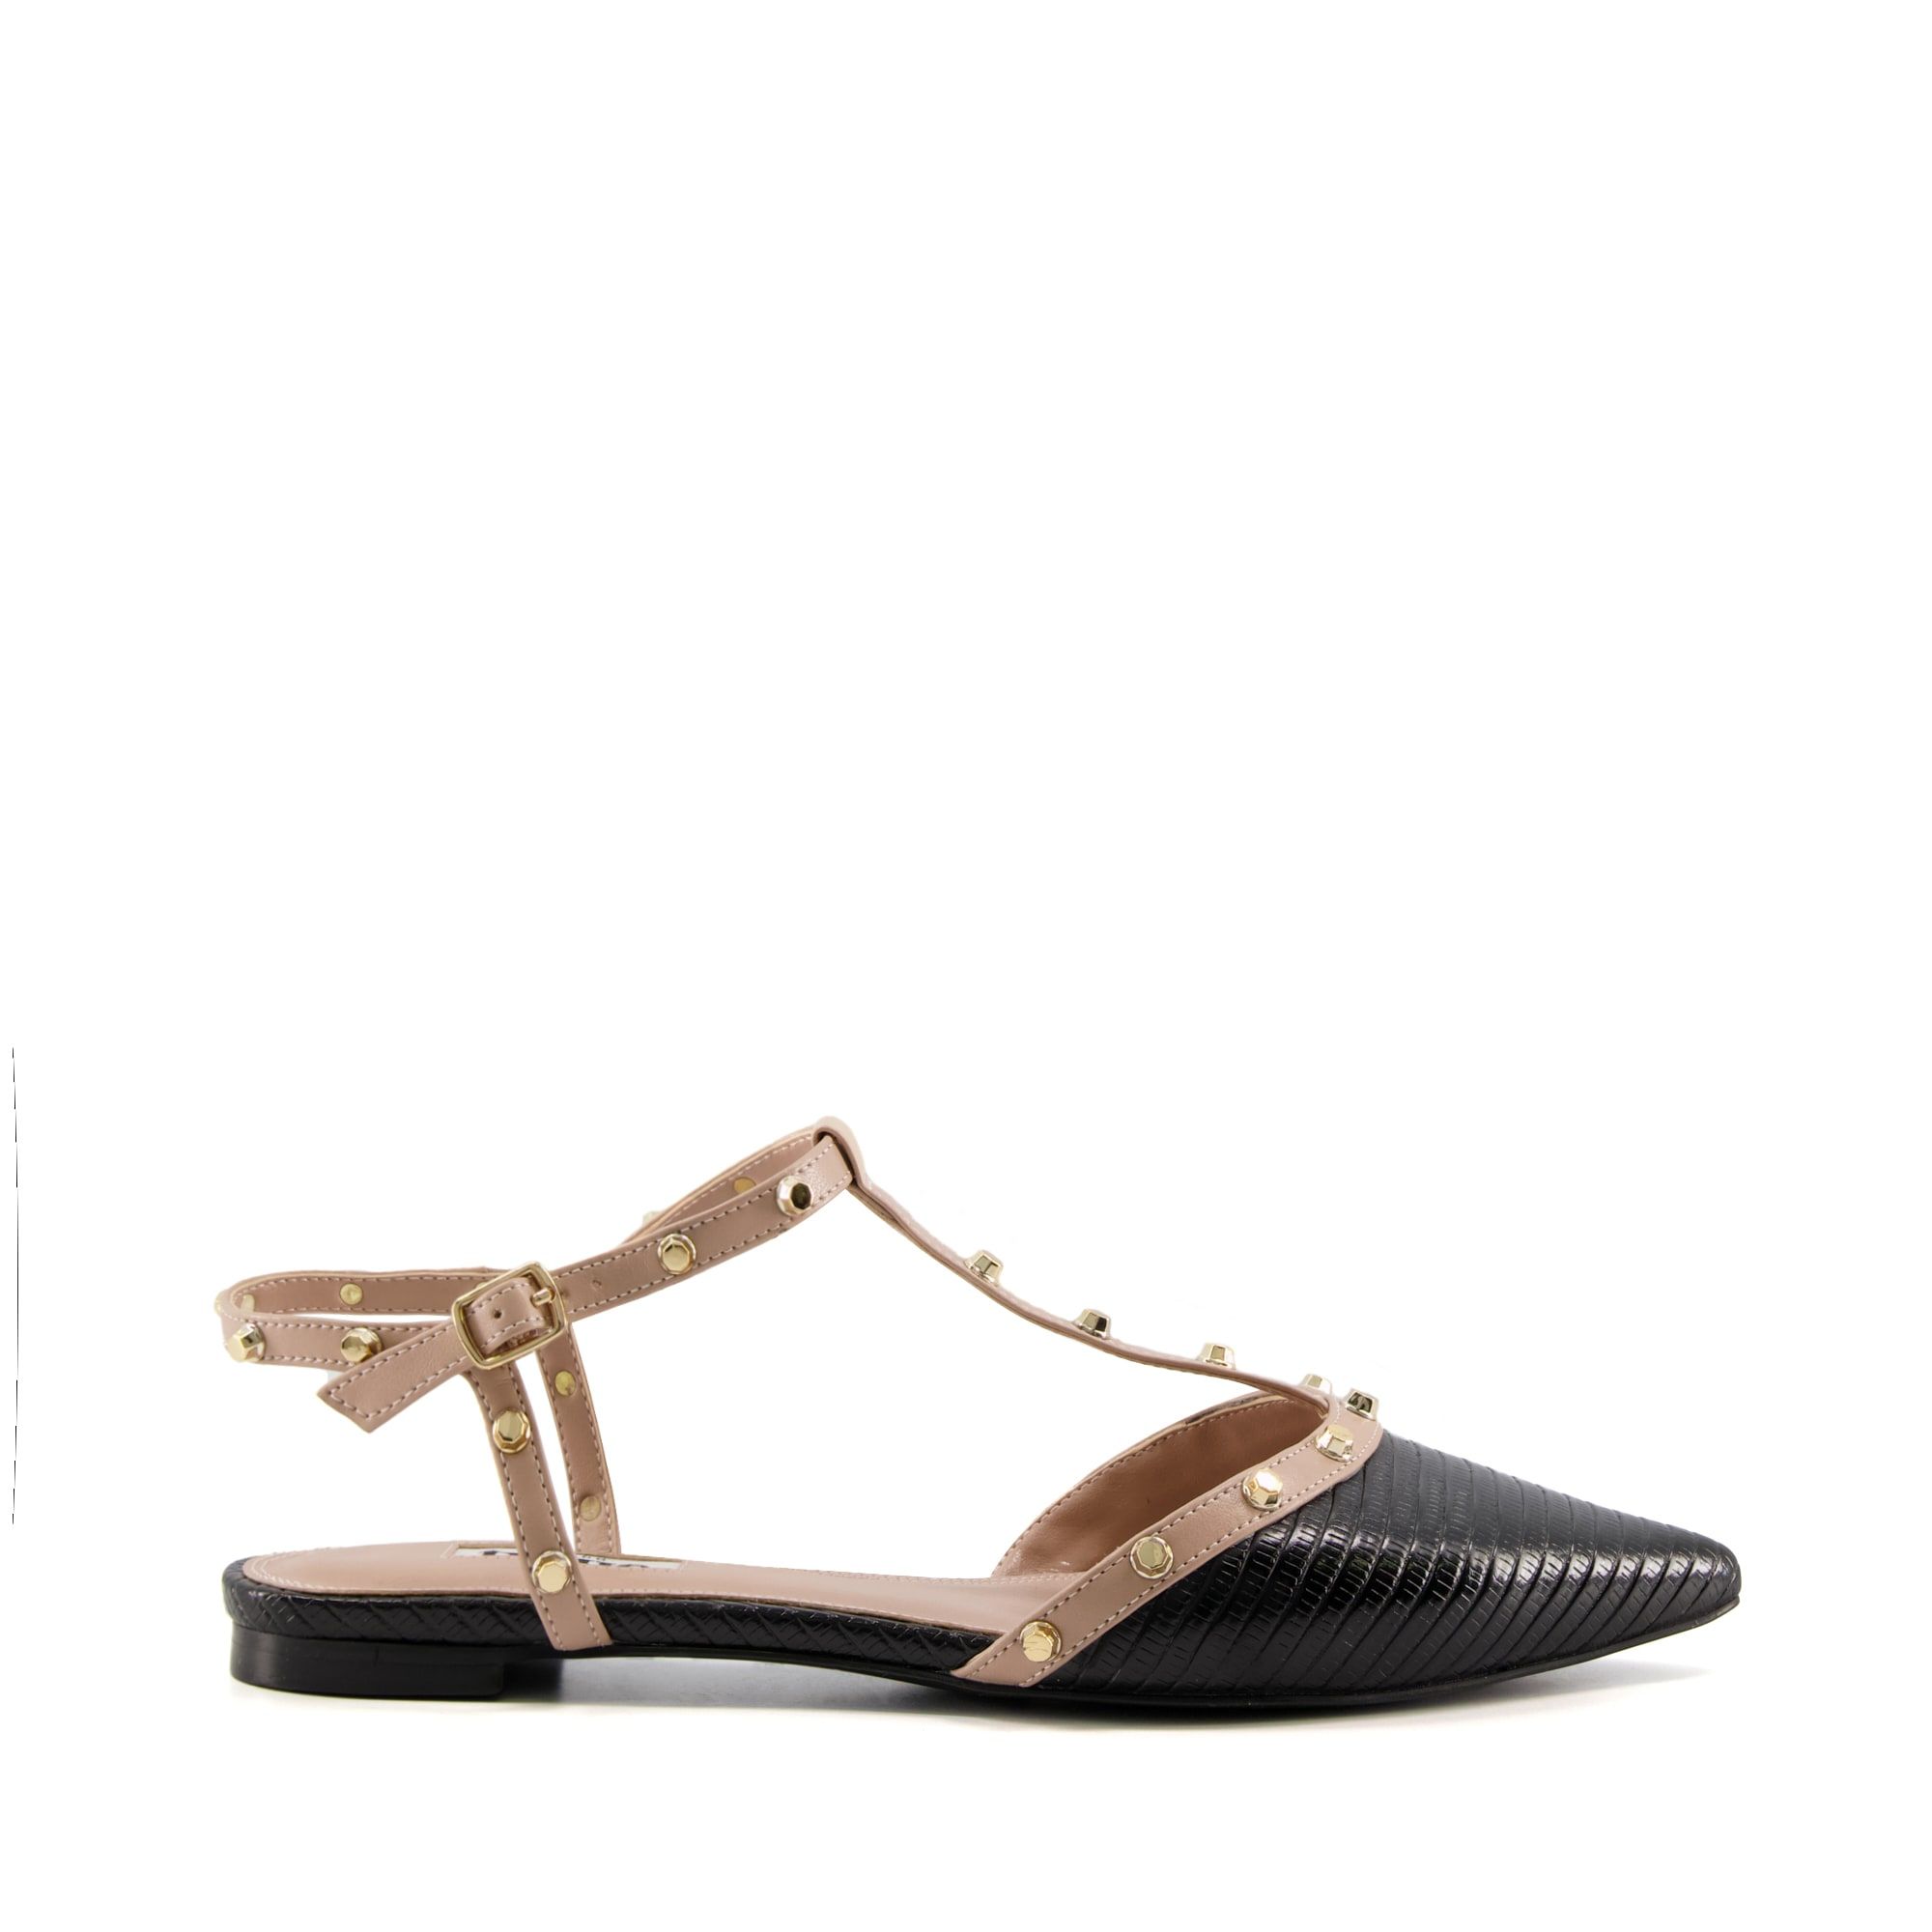 The Cayote flat shoe showcases an open back and sophisticated pointed toe. Featuring a T-bar design with studded hardware trims and stitch detail. The adjustable buckle fastening completes this feminine style.